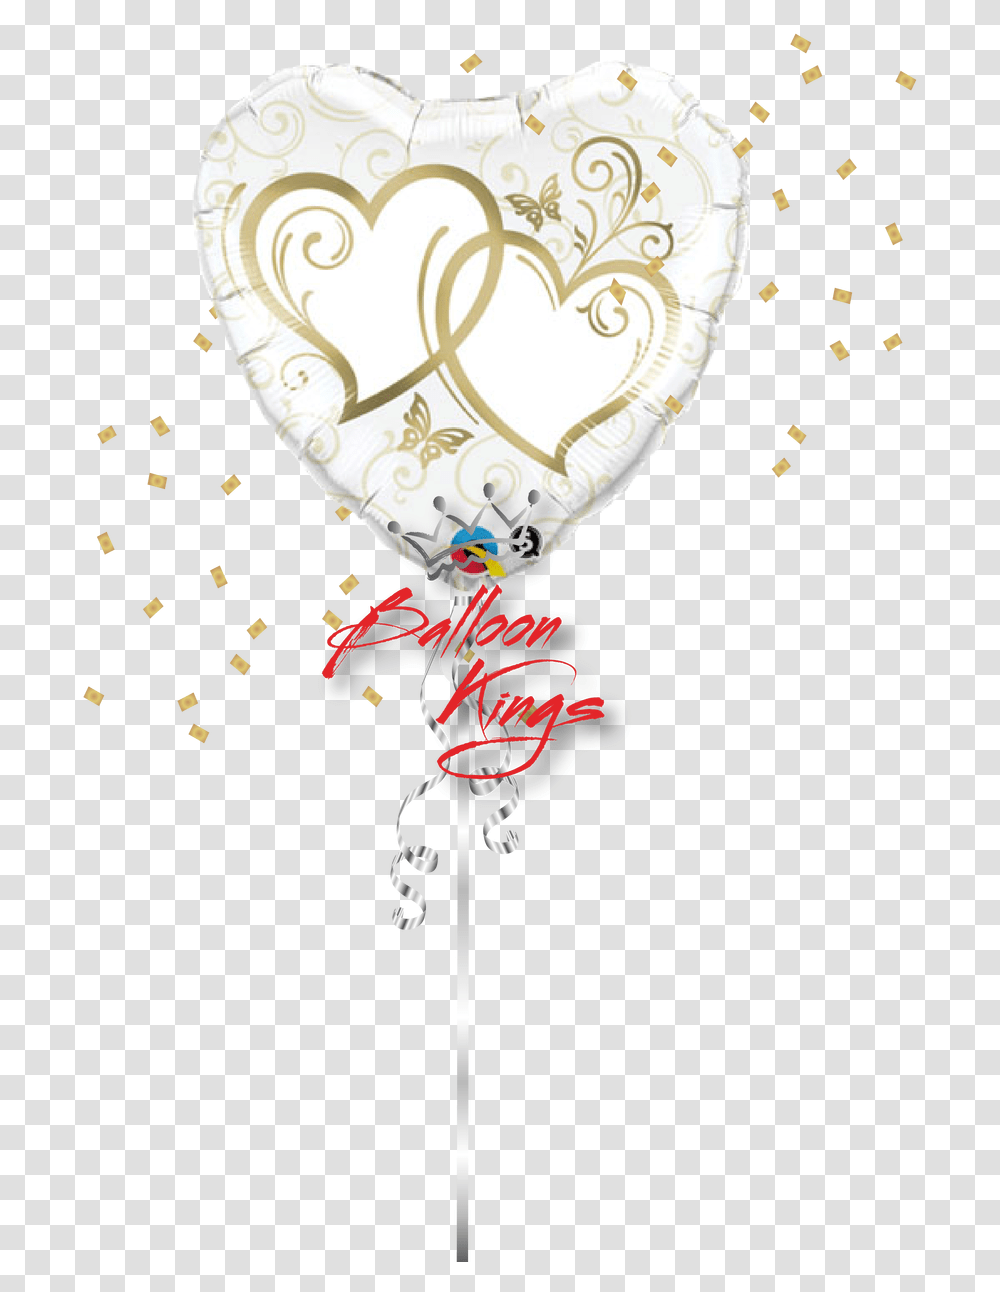 Entwined Gold Hearts Dessin Coeurs Entrelace, Balloon, Paper, Confetti, Pattern Transparent Png